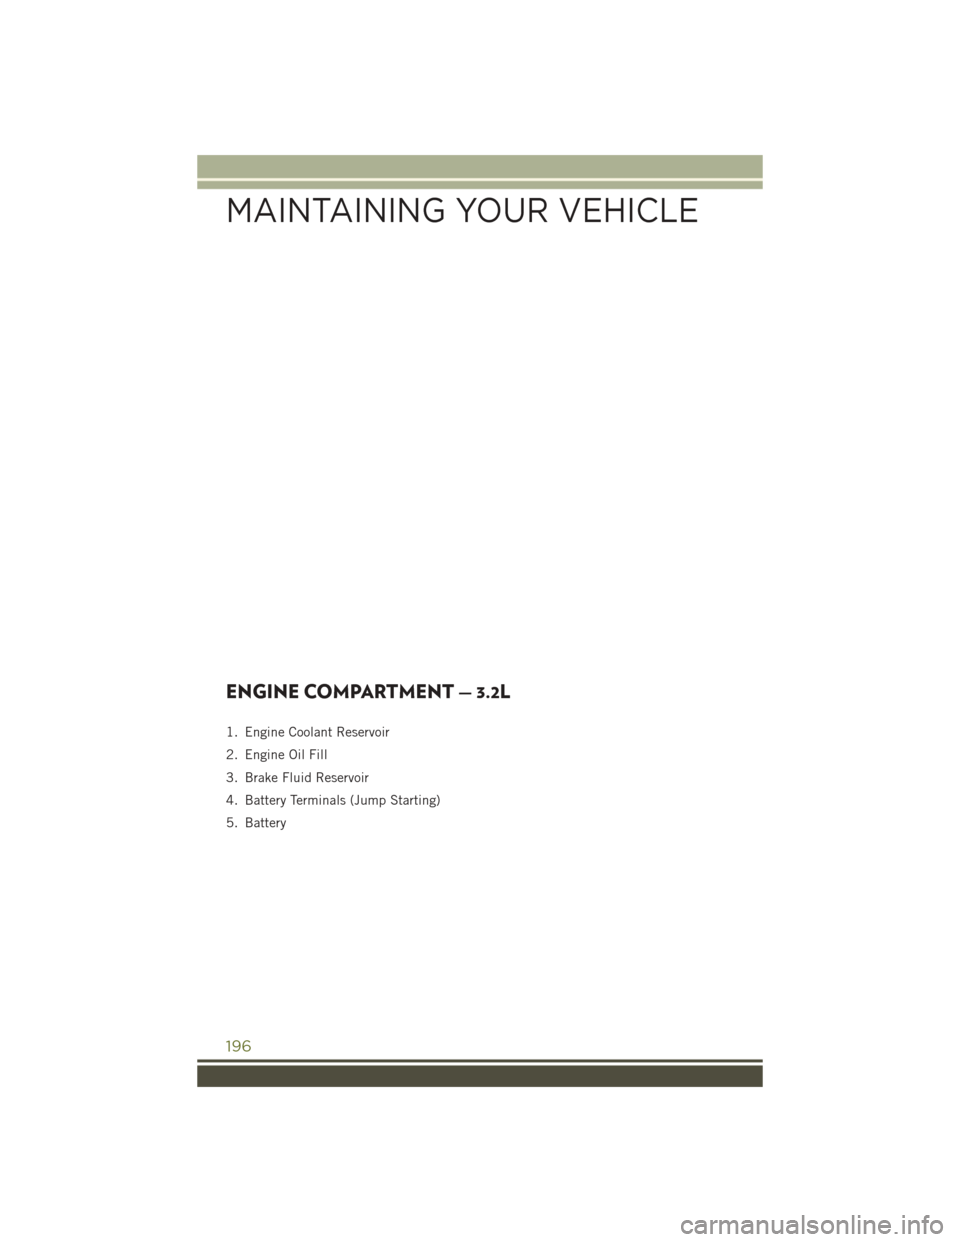 JEEP CHEROKEE 2016 KL / 5.G User Guide ENGINE COMPARTMENT — 3.2L
1. Engine Coolant Reservoir
2. Engine Oil Fill
3. Brake Fluid Reservoir
4. Battery Terminals (Jump Starting)
5. Battery
MAINTAINING YOUR VEHICLE
196 